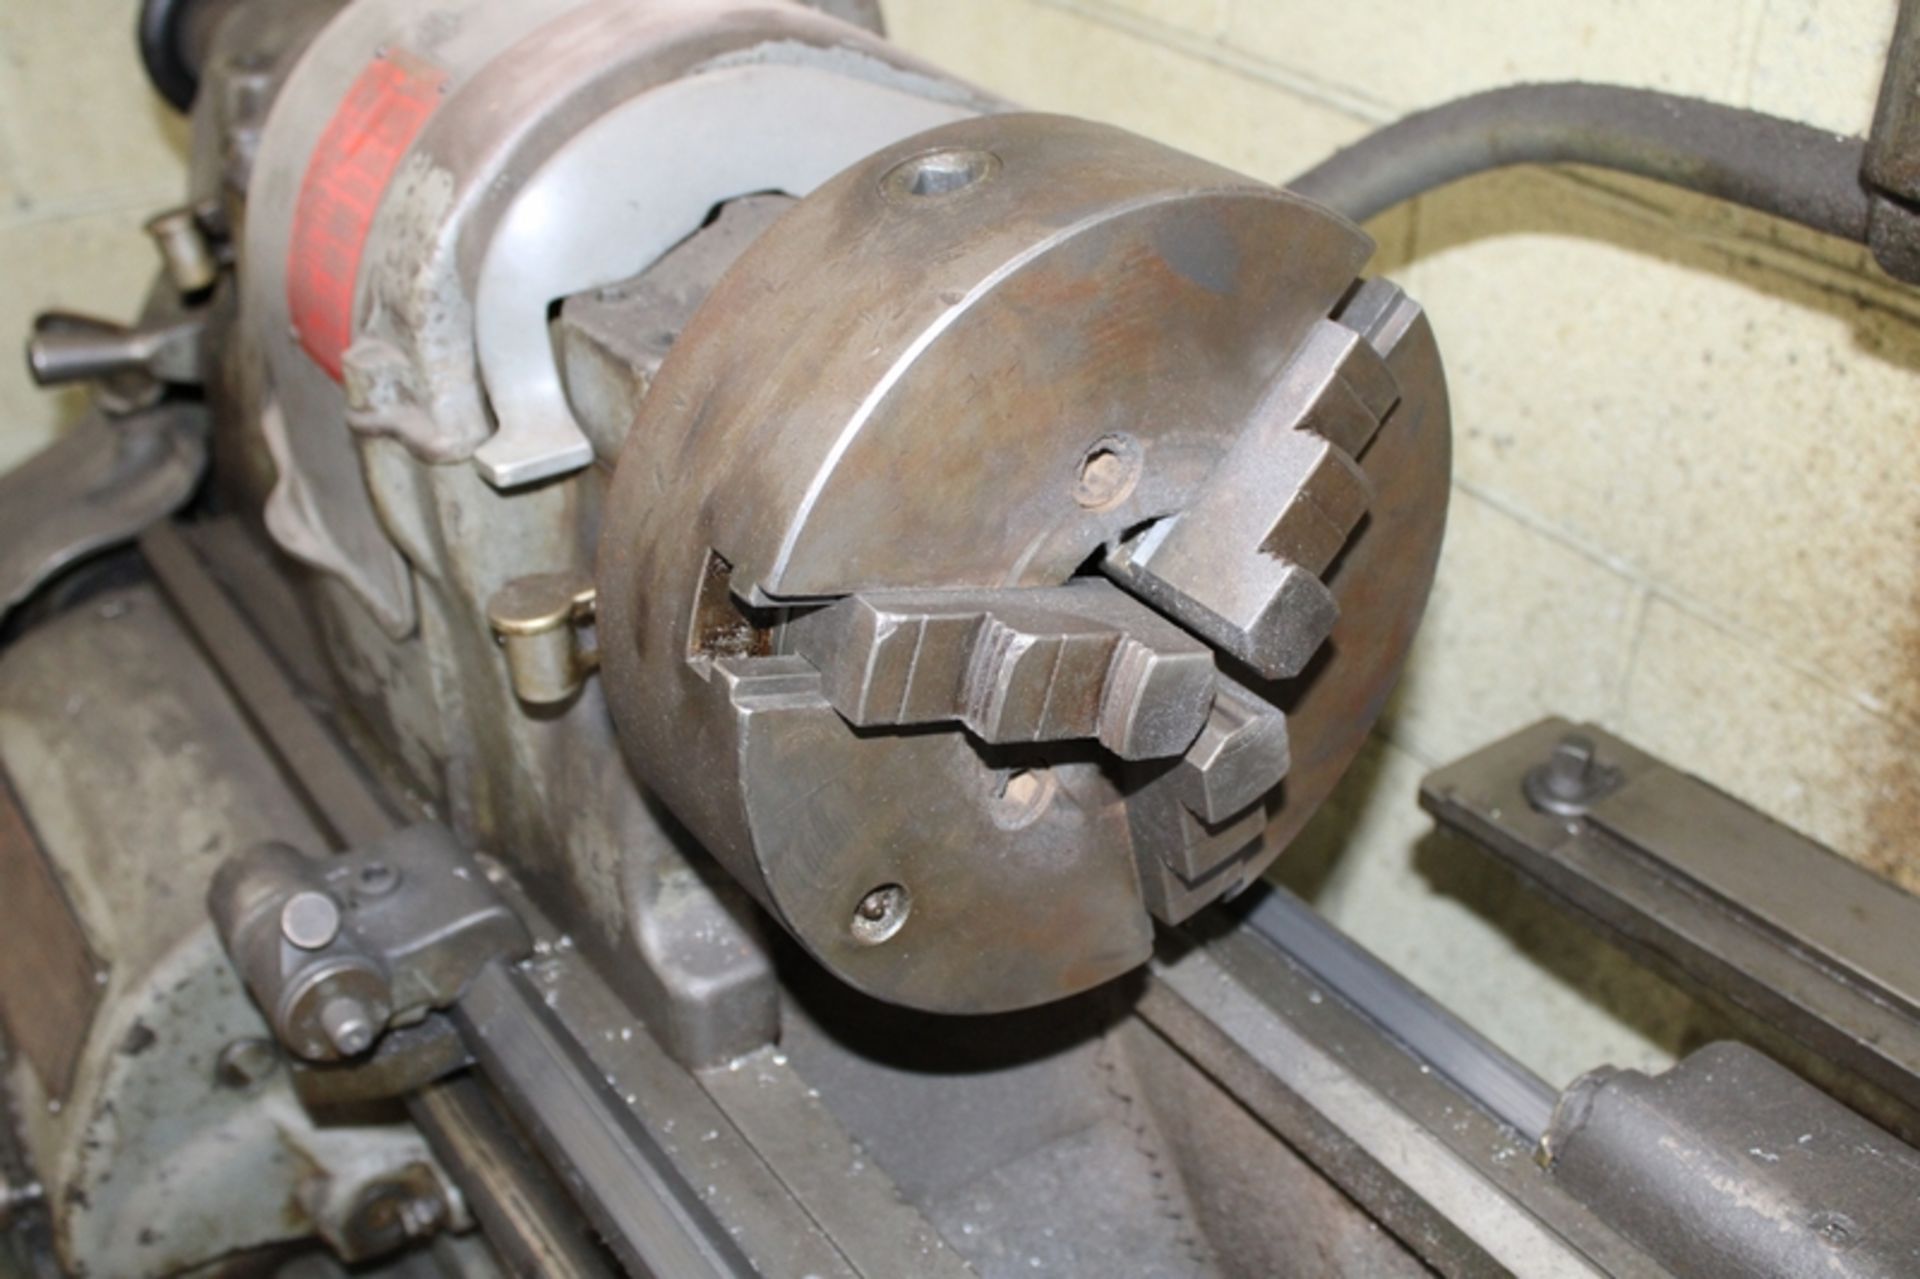 SOUTH BEND 15”X36” TOOLROOM LATHE, S/N 11489HKR15, 10” 3-JAW CHUCK, INCH THREADING, TAPER - Image 4 of 9